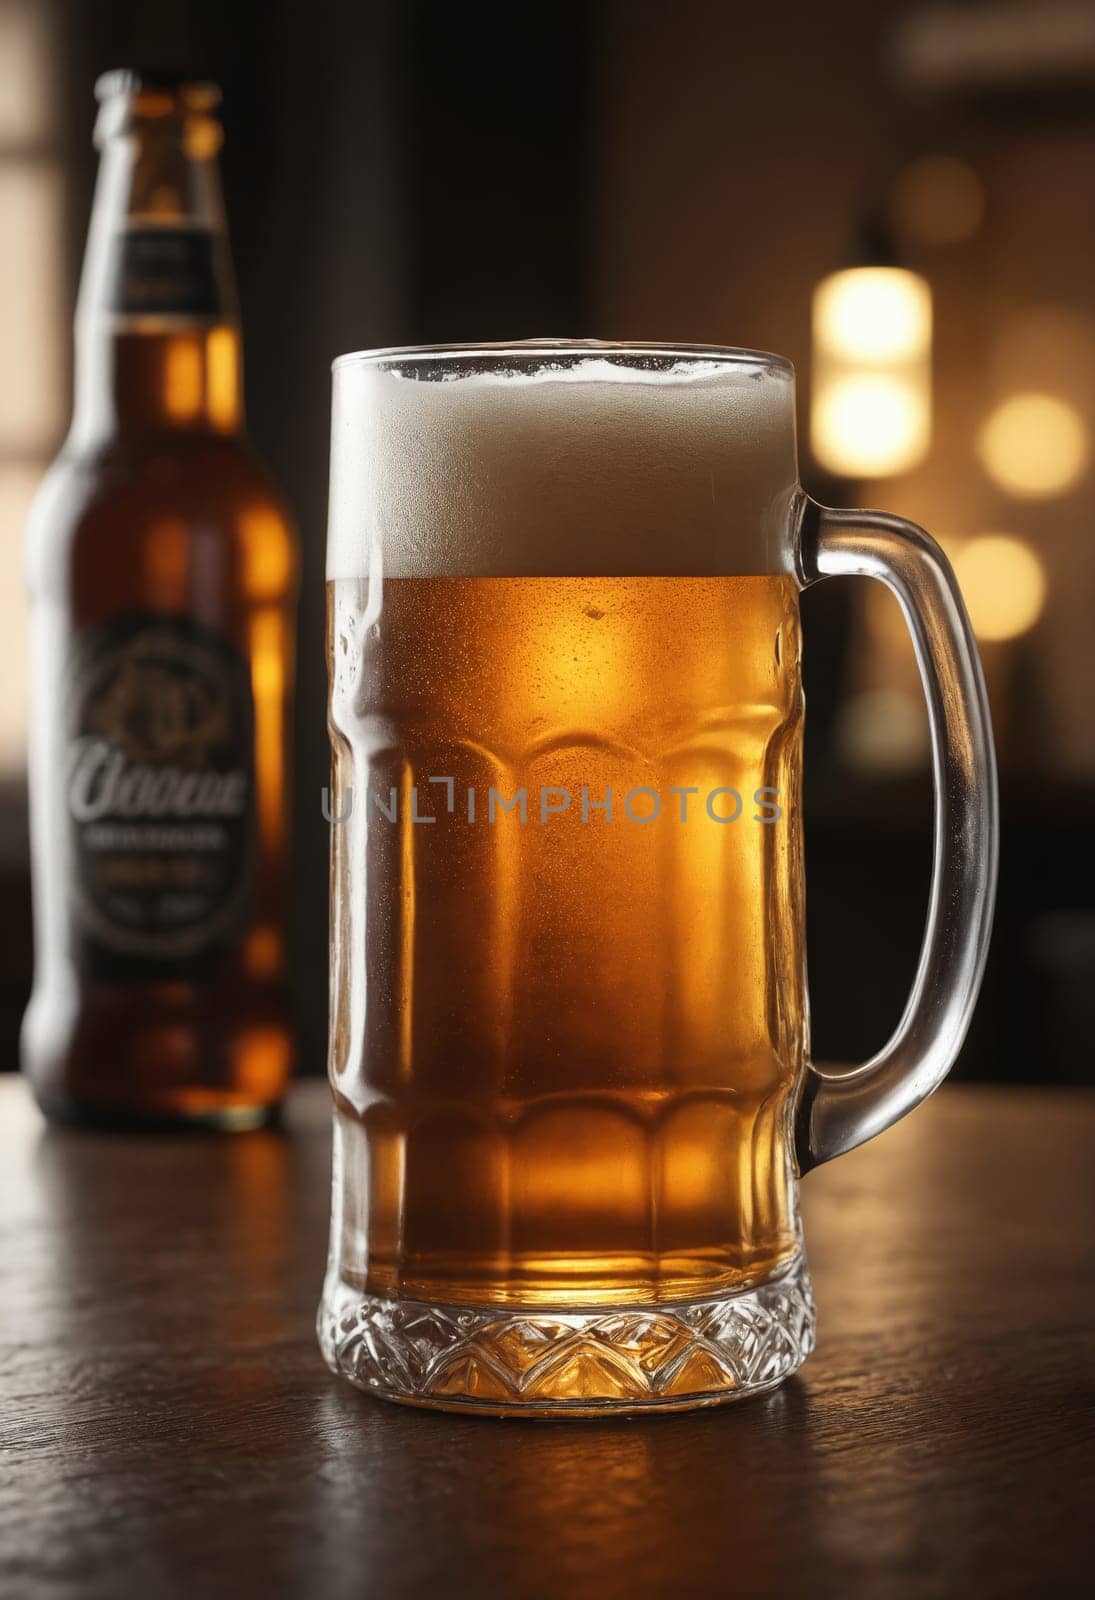 A bottle of beer and a glass of beer are placed on a wooden table. The amber liquid in the bottle and glass is ready to be enjoyed as a refreshing drink